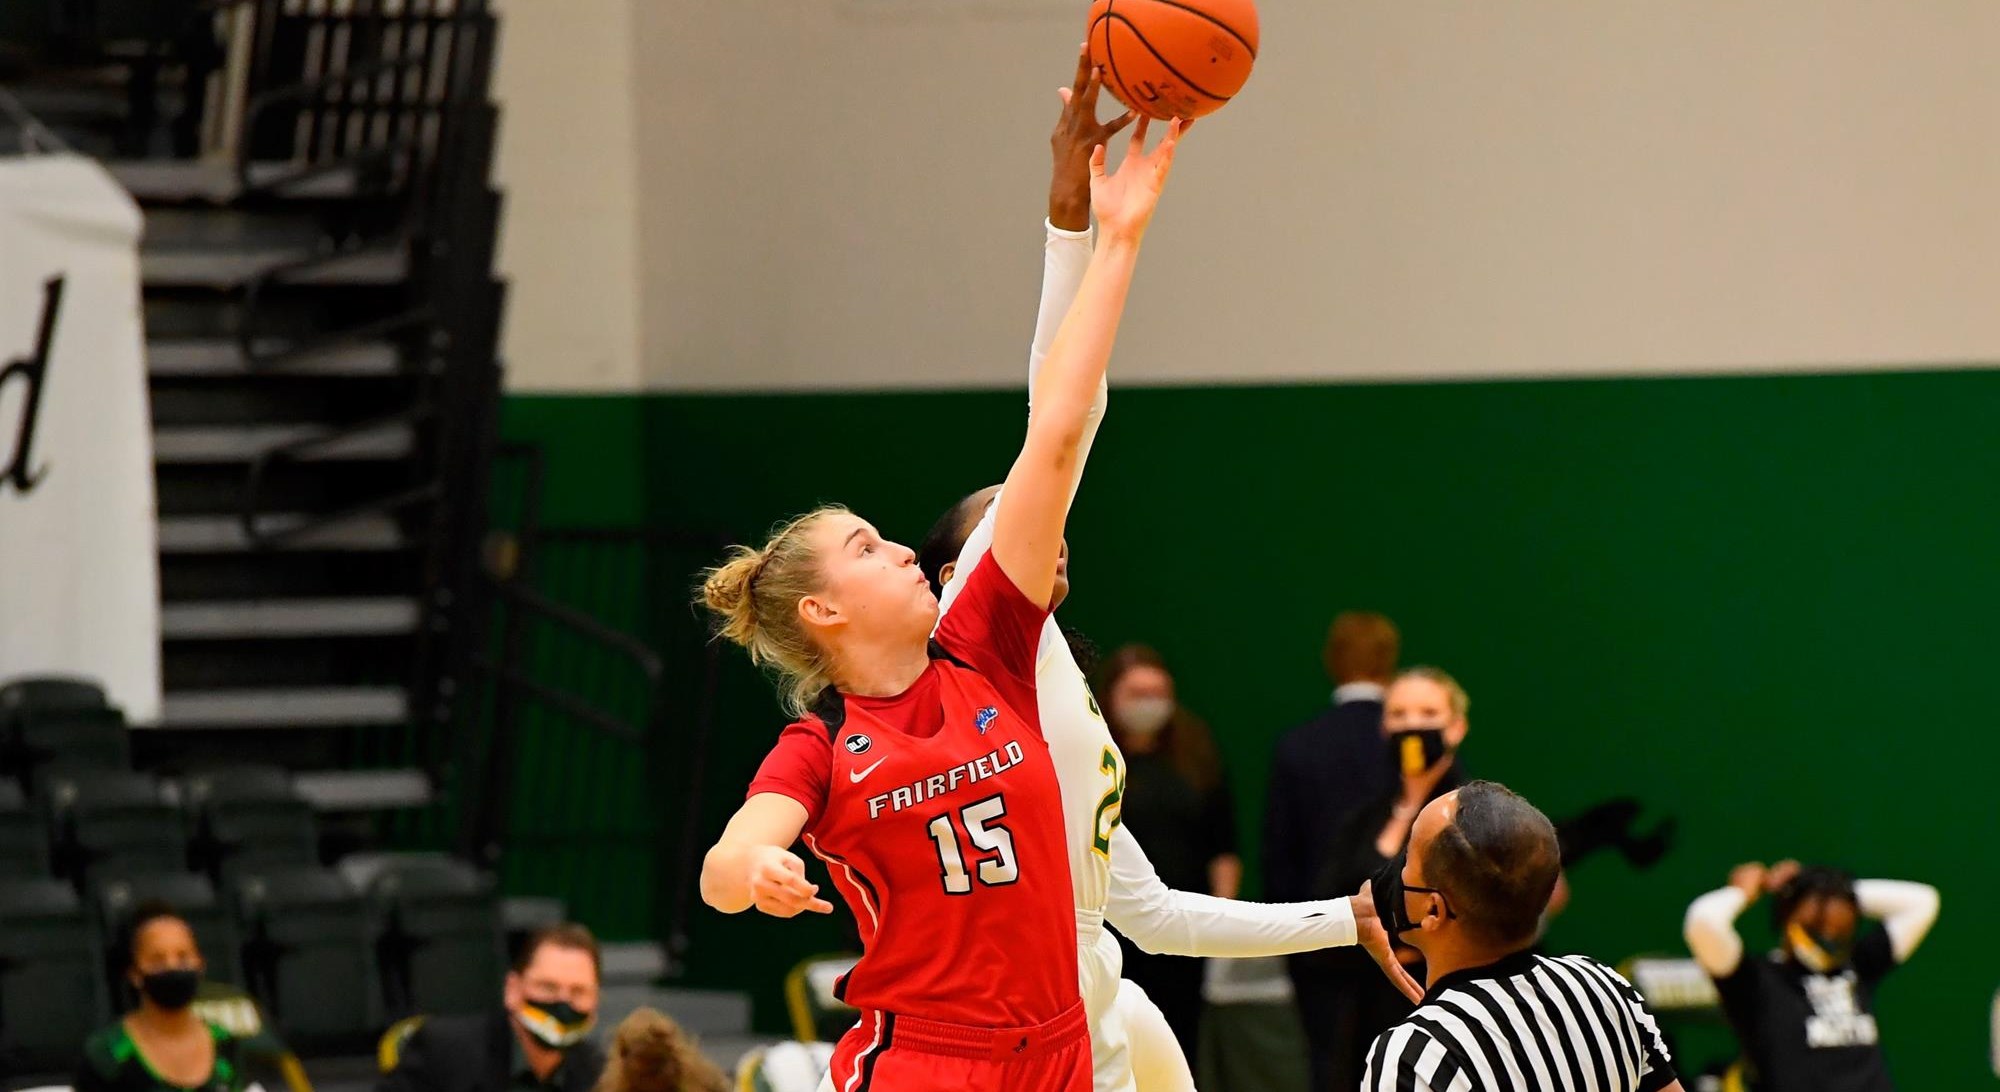 Katie Armstrong attempts to grab a rebound during a game.